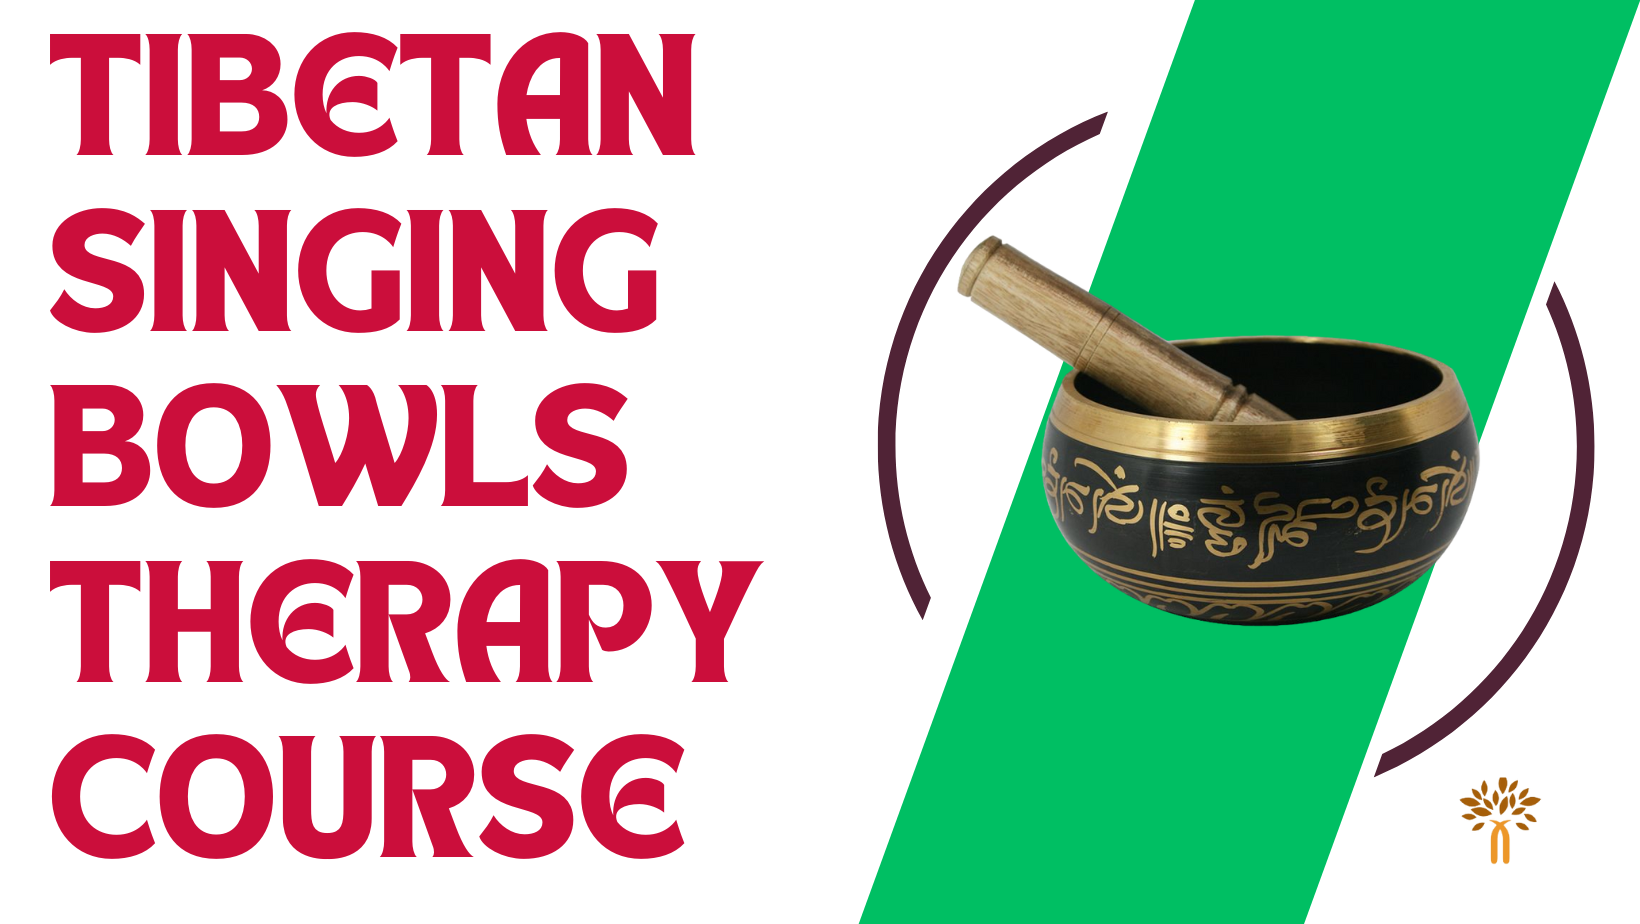 Tibetan Singing Bowls Therapy Courses in Lucknow